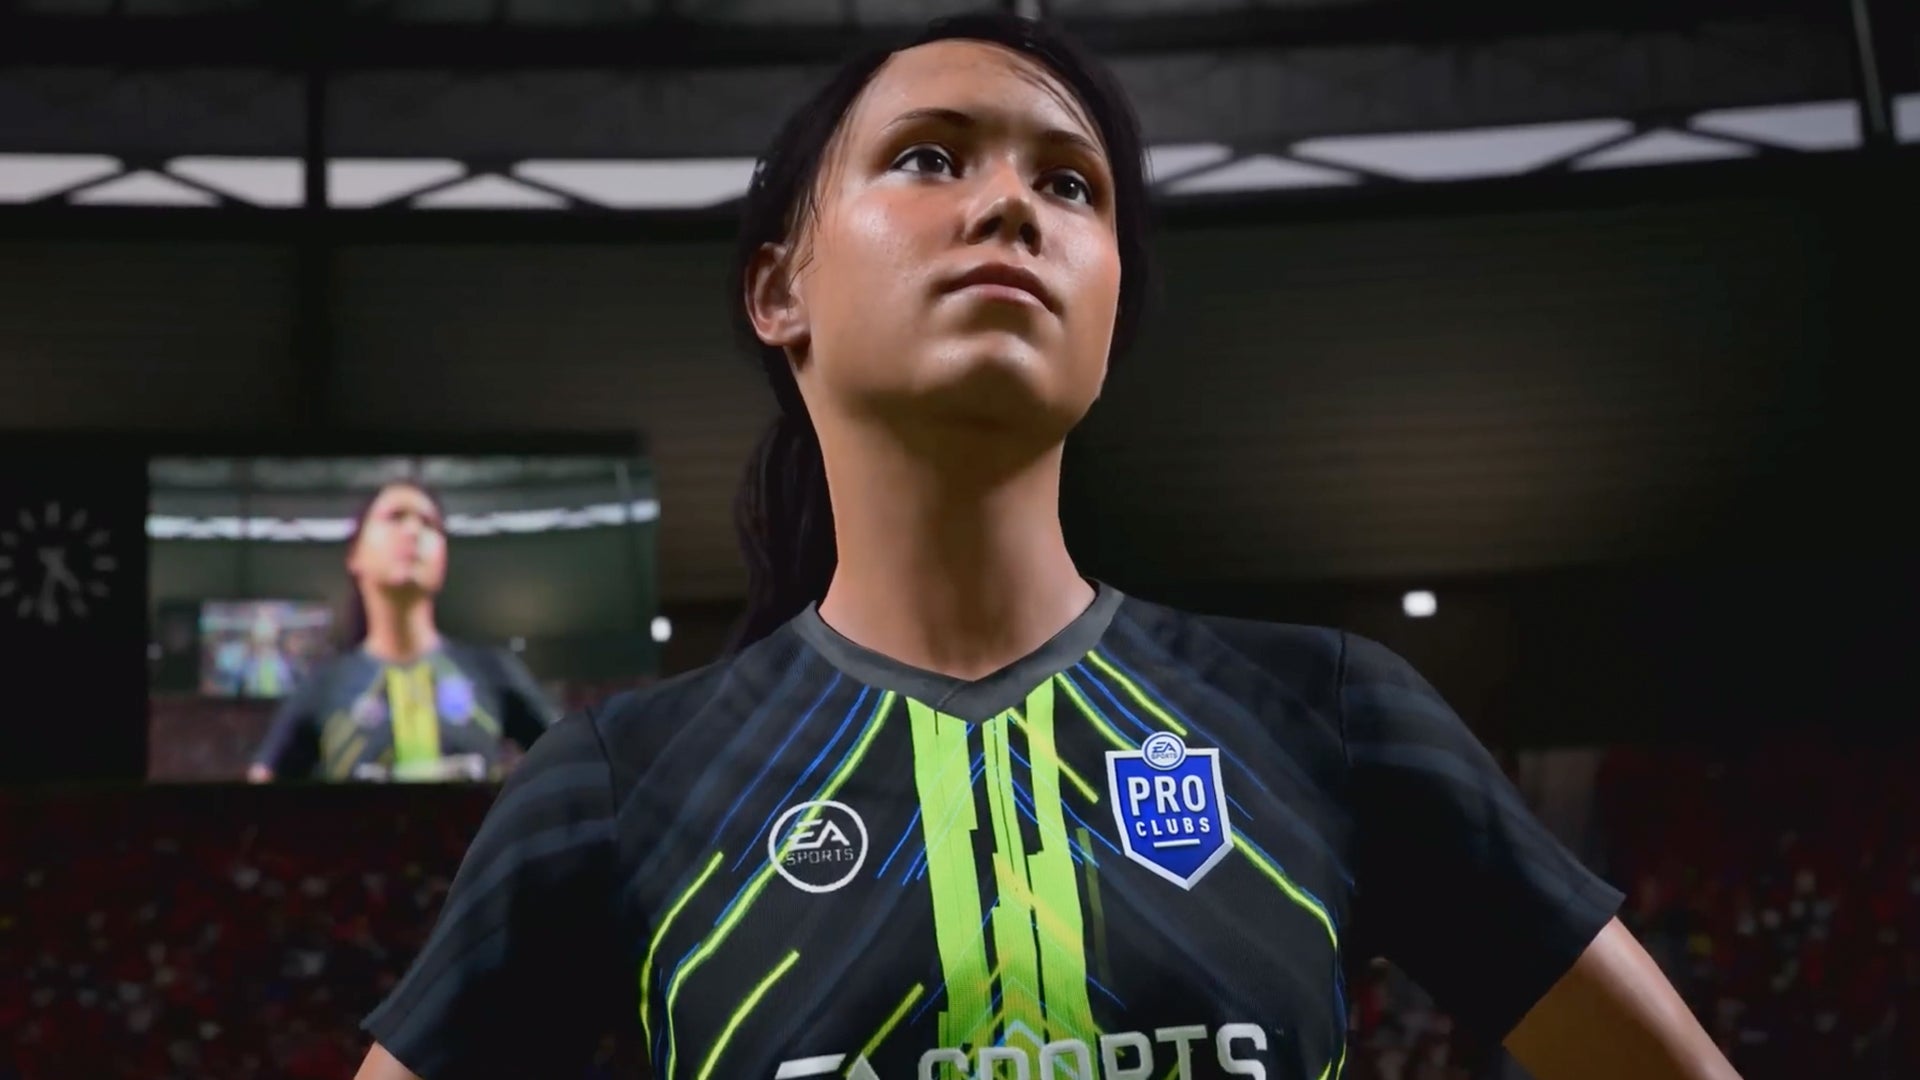 FIFA 23 early access: How it works, release date, EA Play details